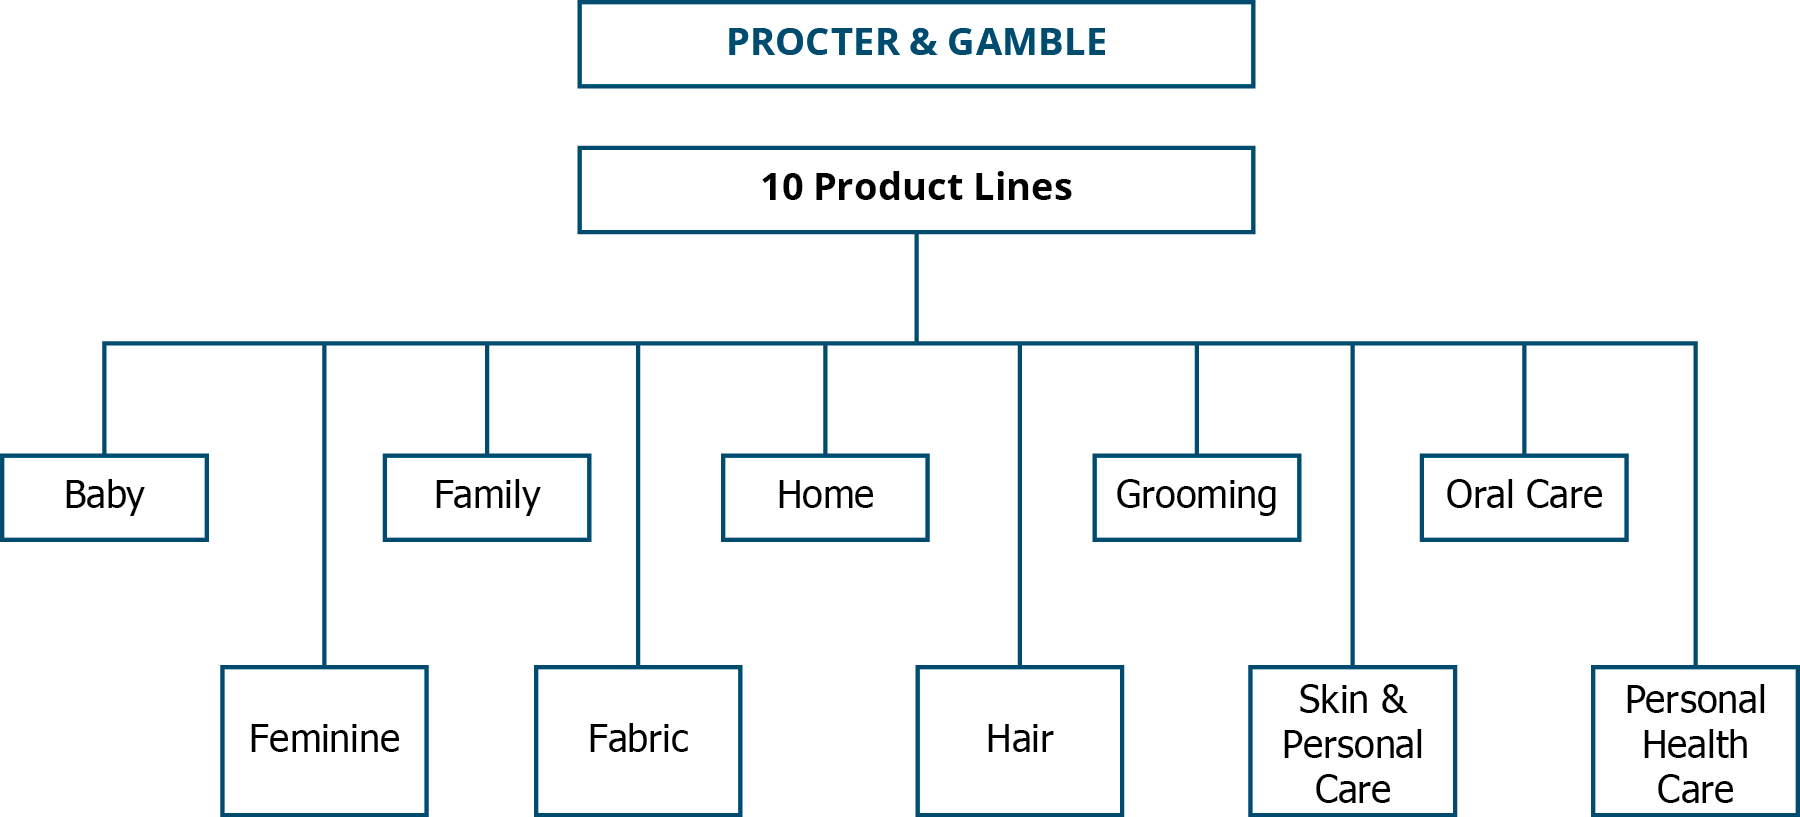 Organizational chart of Procter & Gamble showing the 10 product lines: Baby, Feminine, Family, Fabric, Home, Hair, Grooming, Skin and Personal Care, Oral Care, and Personal Health Care.